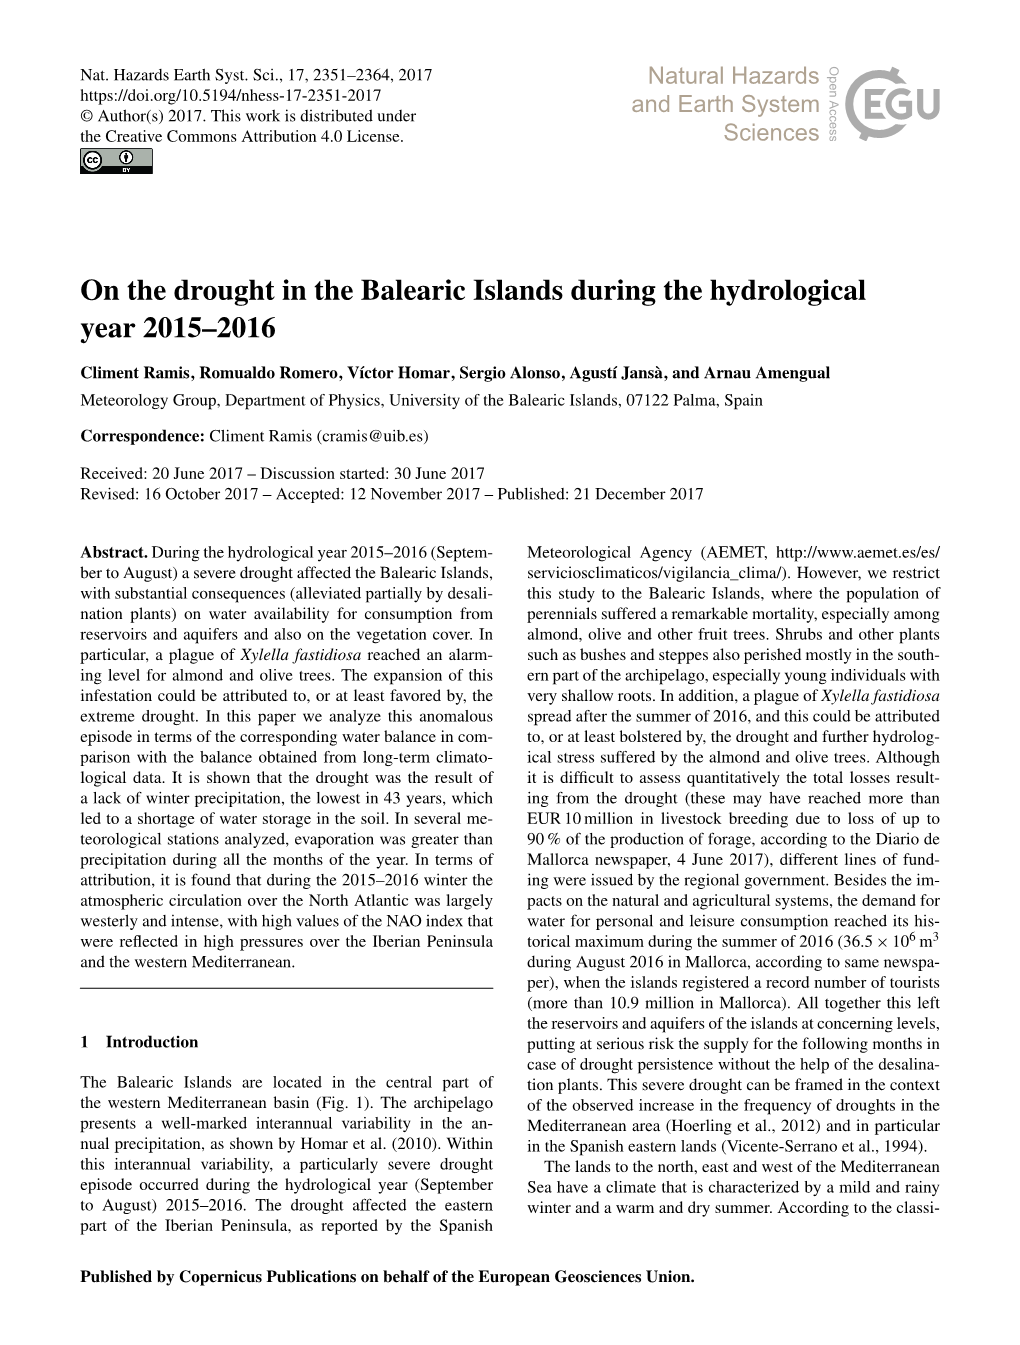 On the Drought in the Balearic Islands During the Hydrological Year 2015–2016